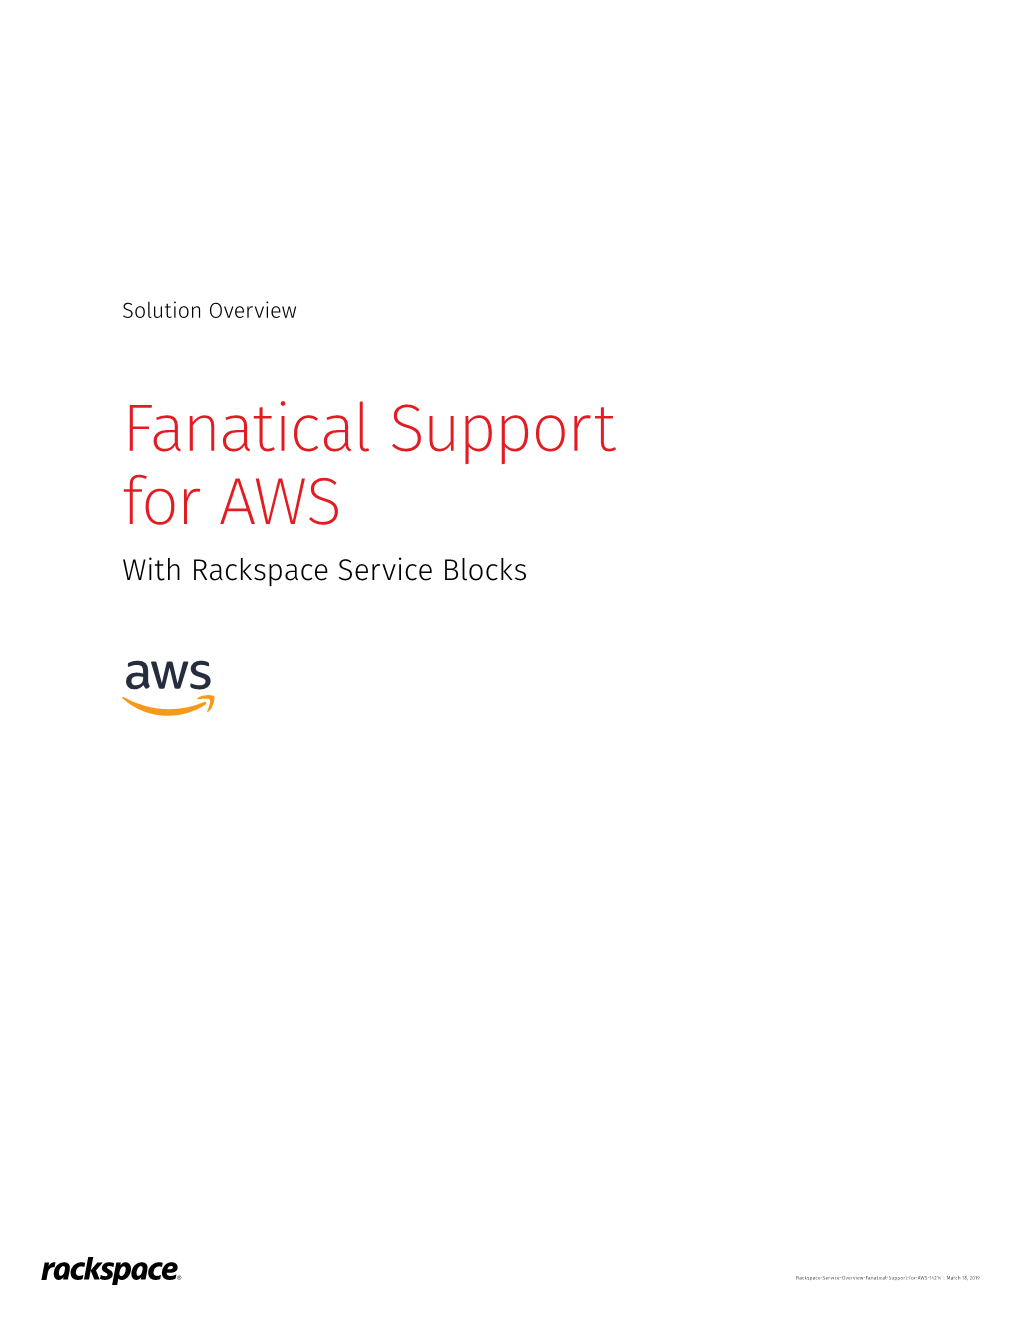 Fanatical Support for AWS with Rackspace Service Blocks